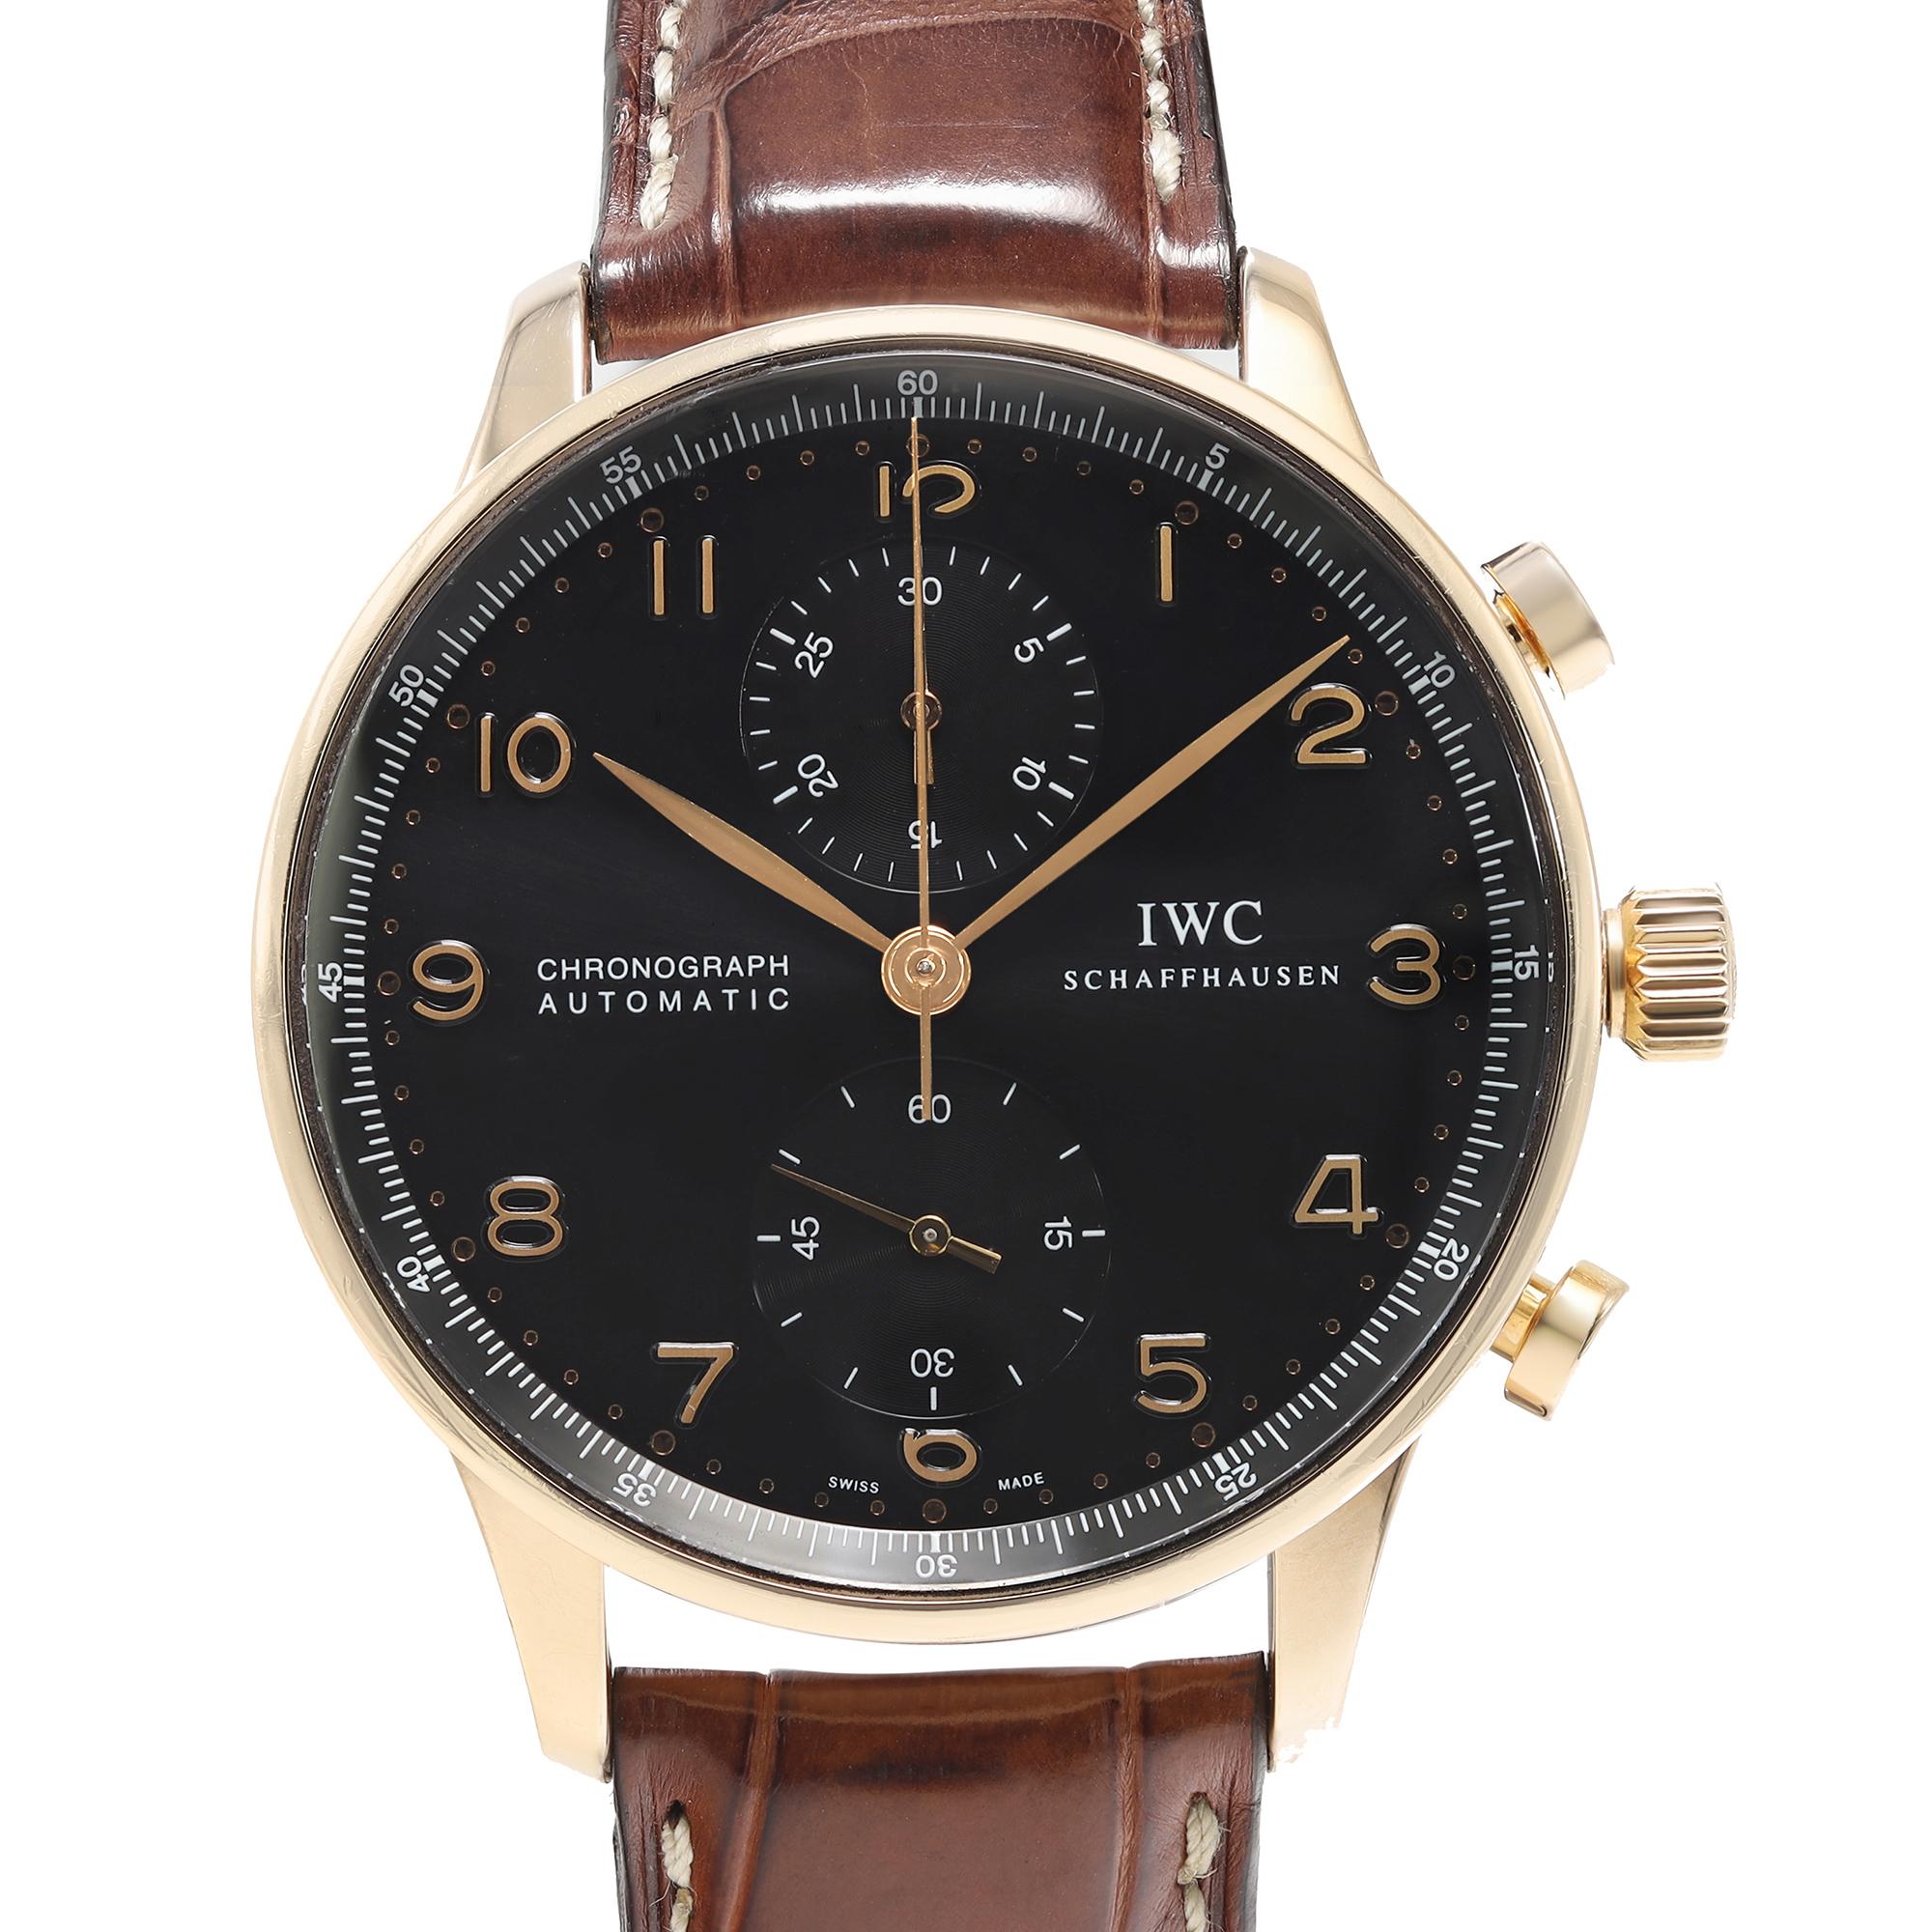 Pre-owned IWC Portuguese 41mm 18k Rose Gold Black Dial Automatic Men Watch IW371415. It is powered by a mechanical (automatic) movement. The dial of this watch has a dent visible under certain angles and direct exposure to light as visible on